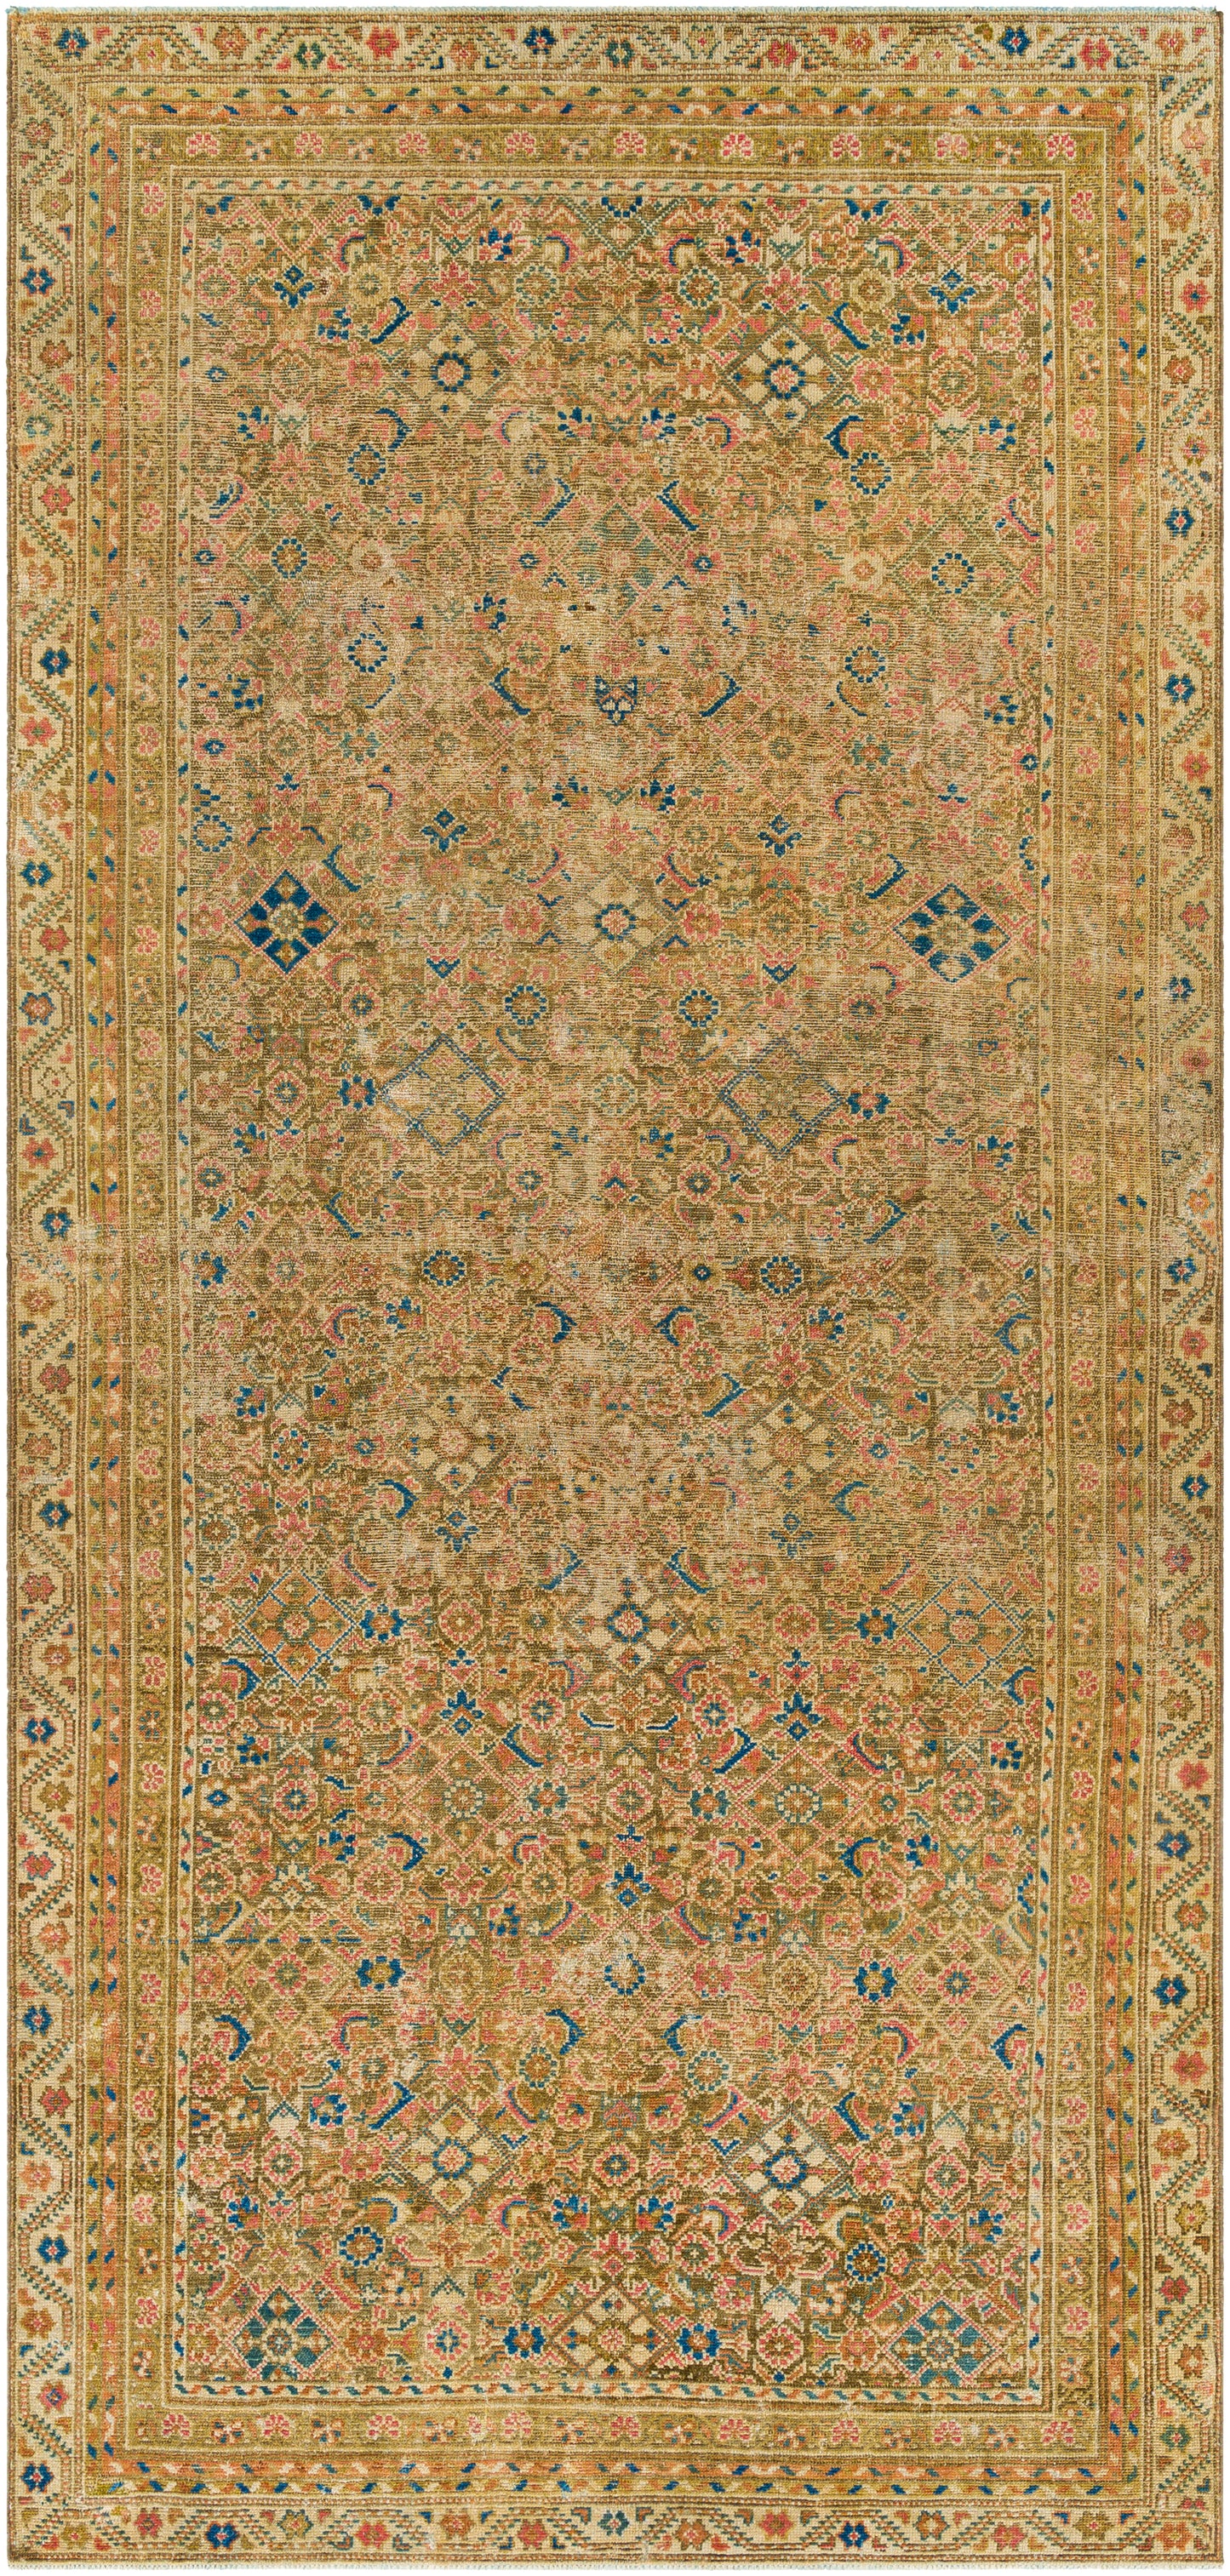 Antique One of a Kind 29811 Hand Knotted Wool Indoor Area Rug by Surya Rugs